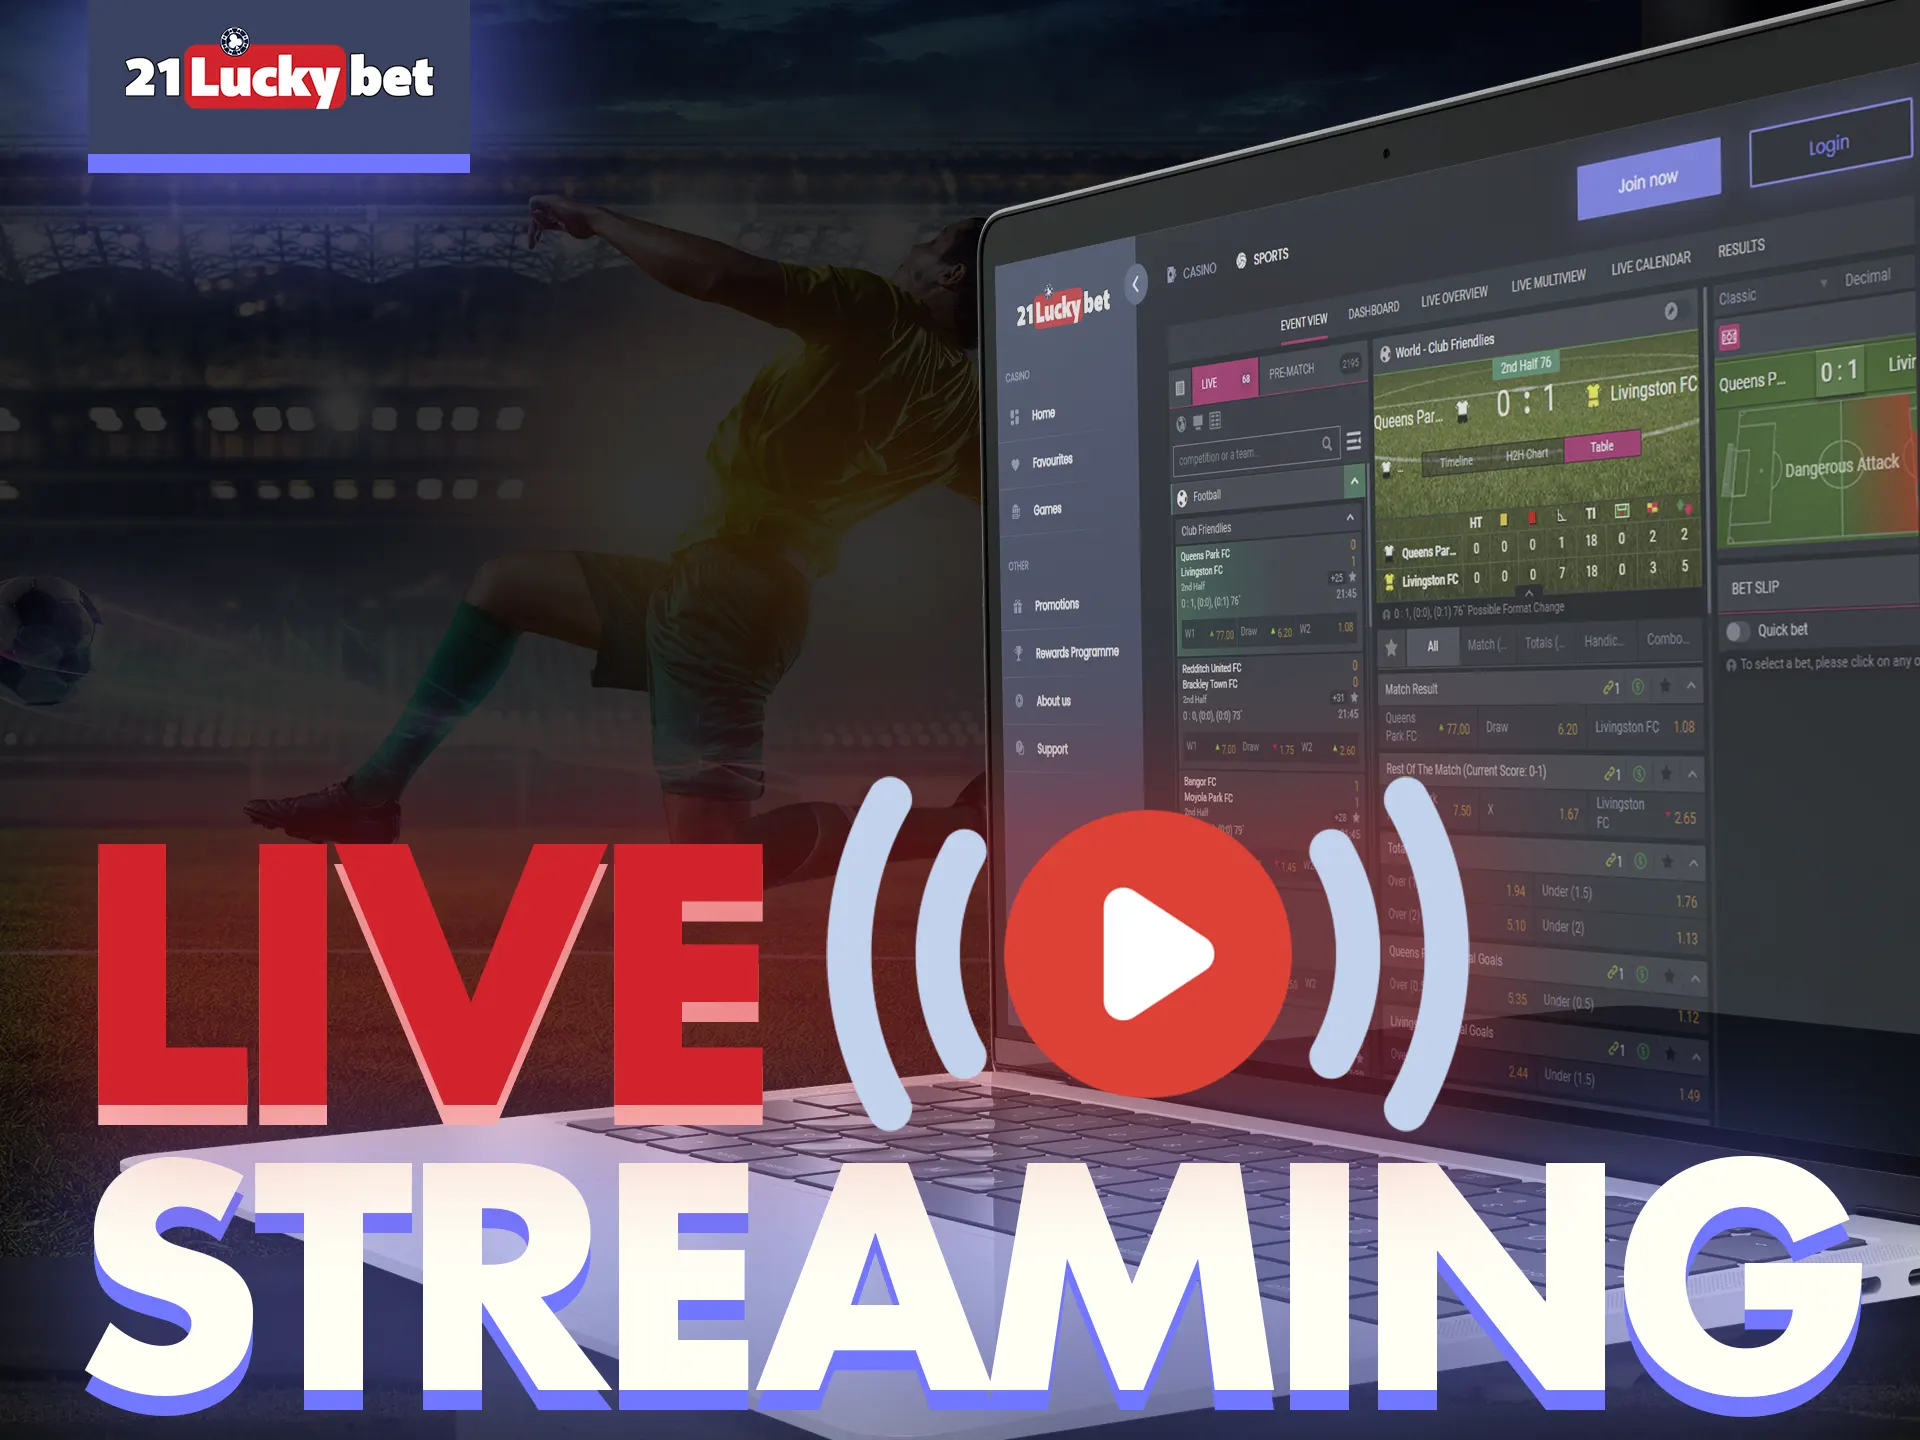 With 21luckybet you can bet on sporting events right during live streaming.